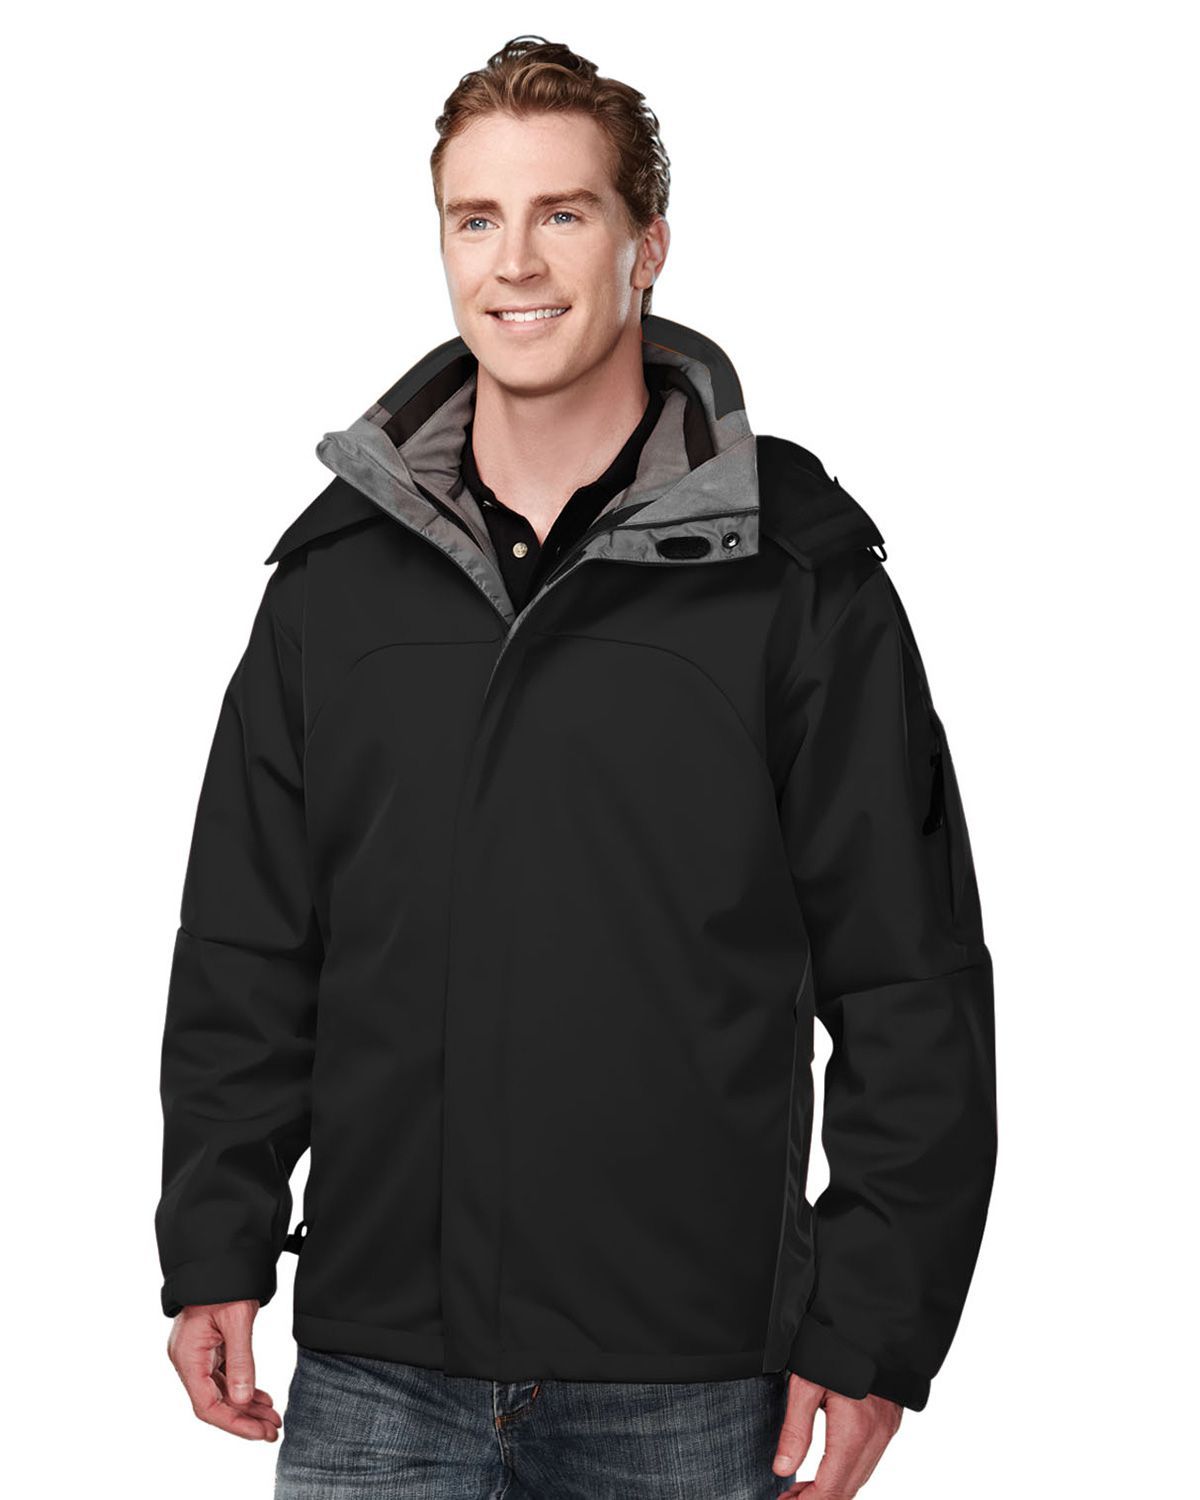 Tri-Mountain Performance 6850 Poly bonded soft shell 3-in-1 jacket ...